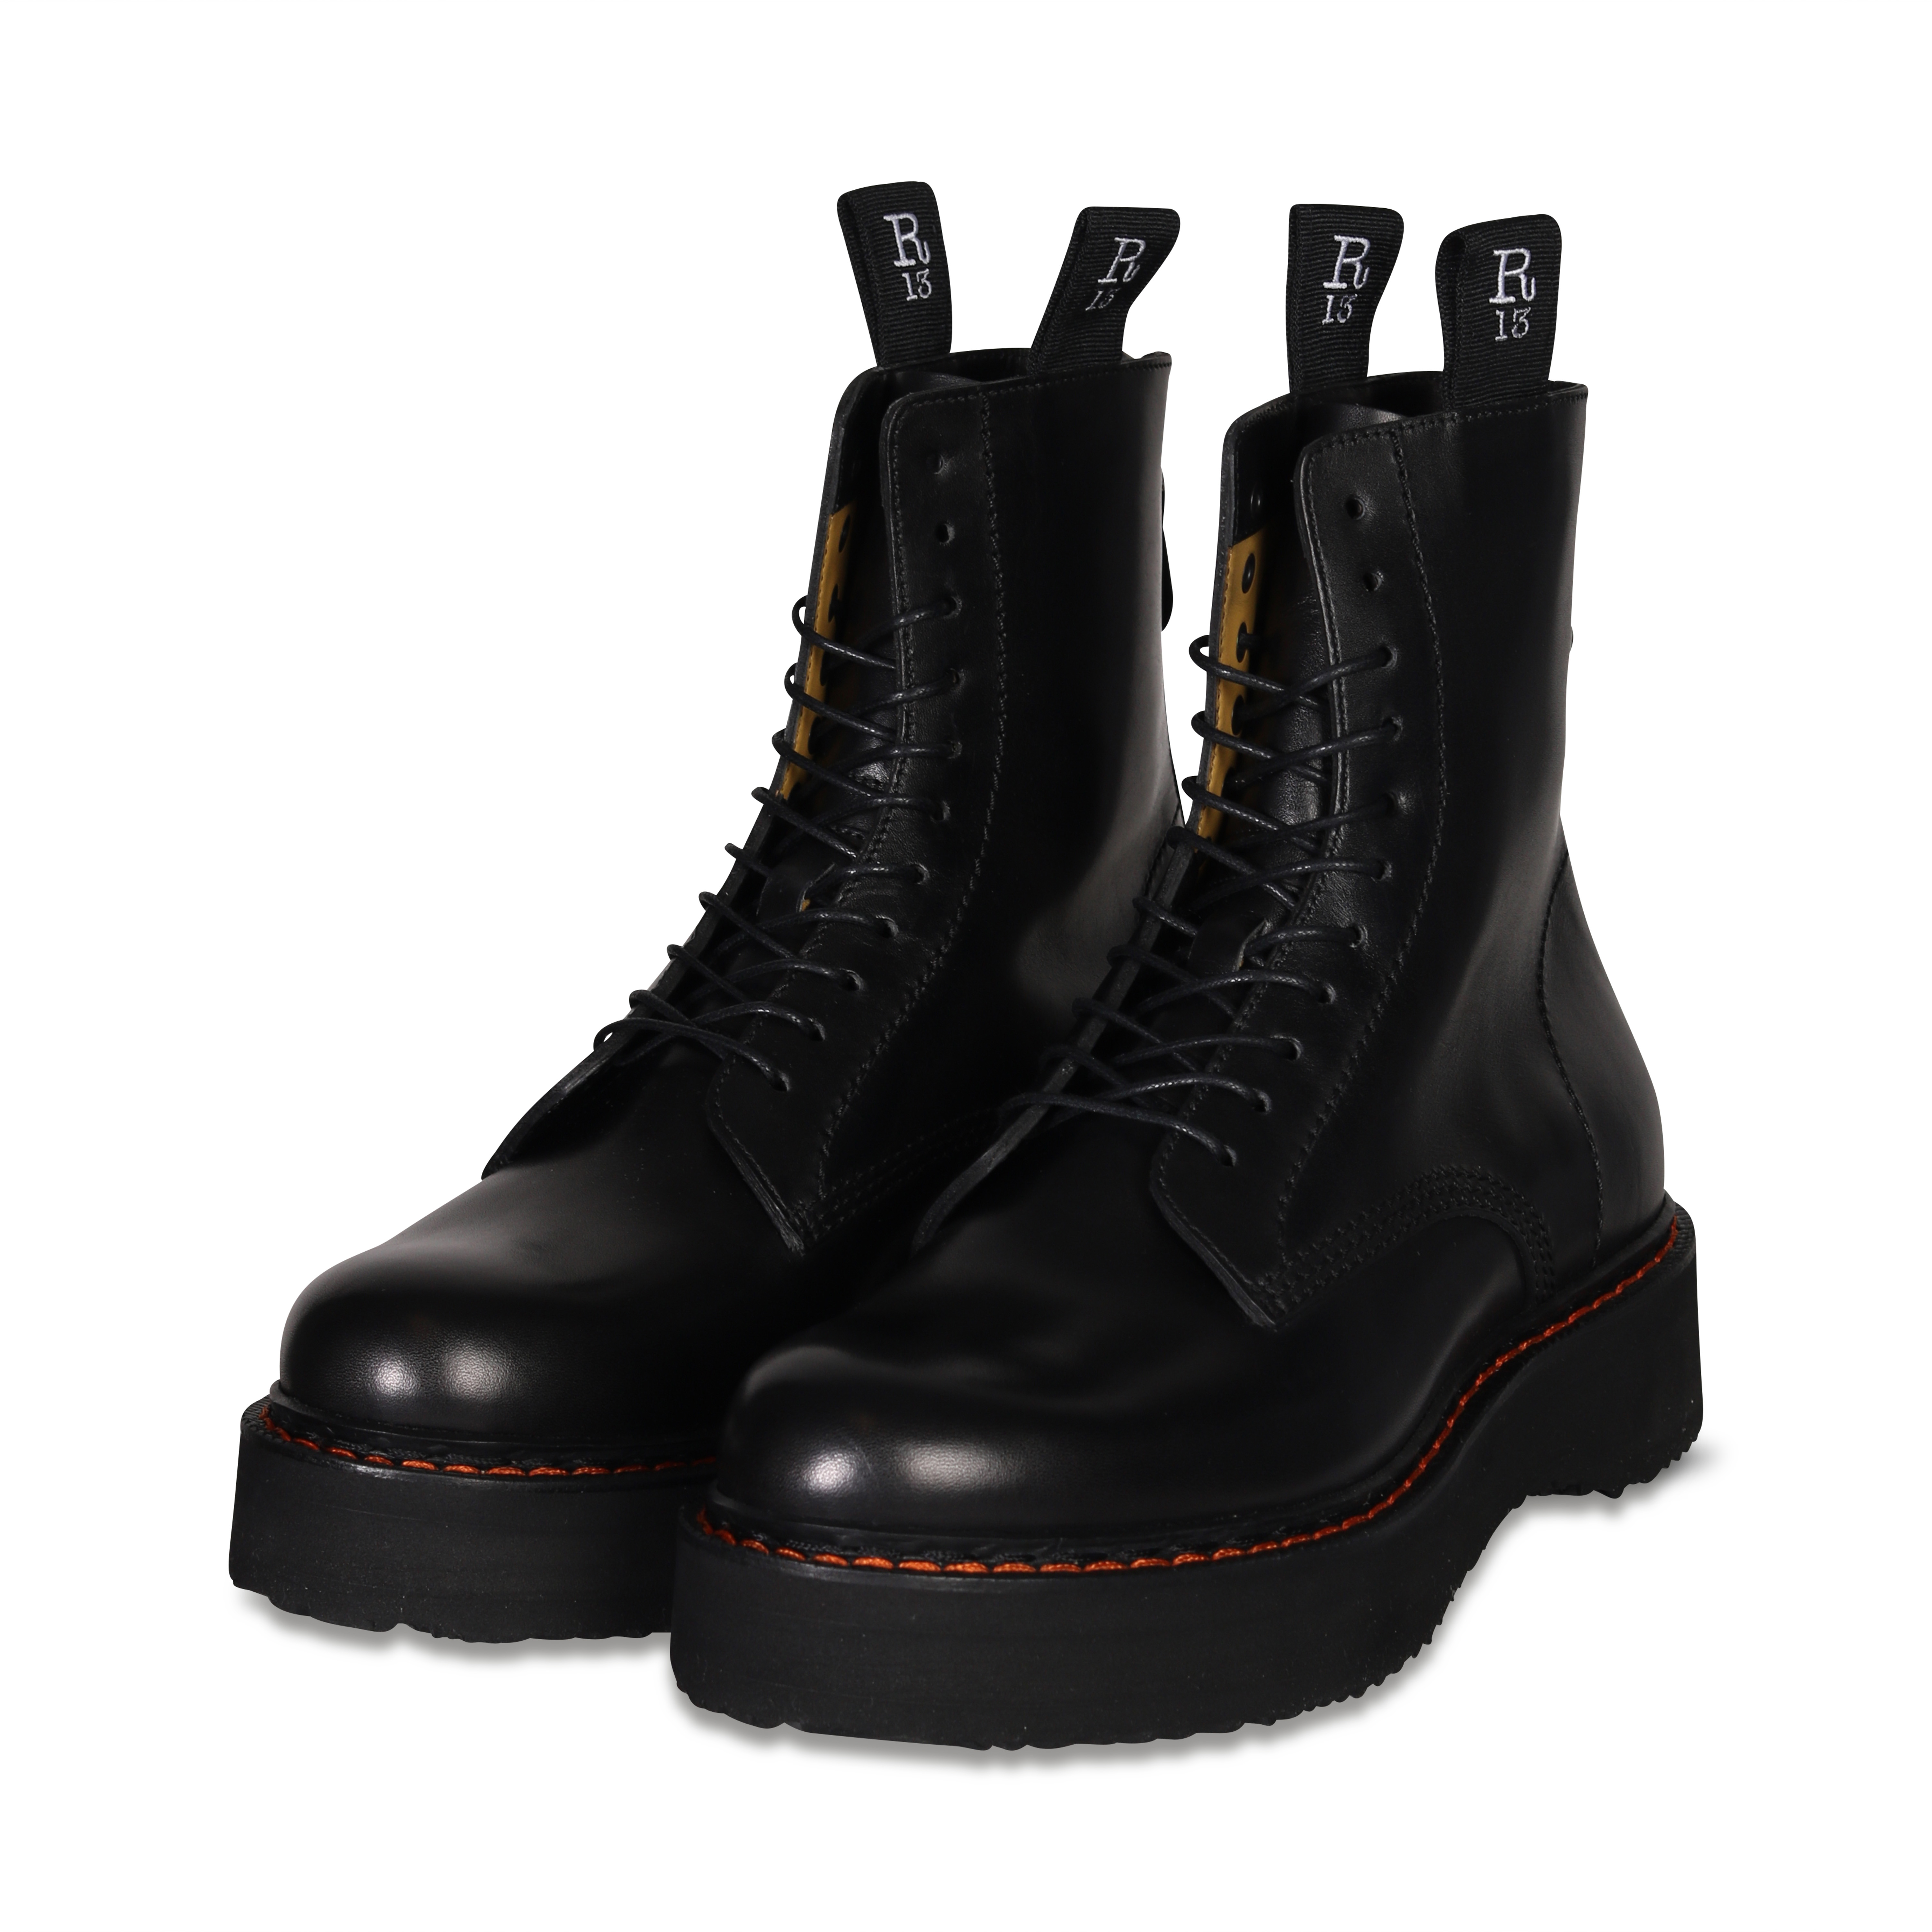 R13 Stack Boots Black